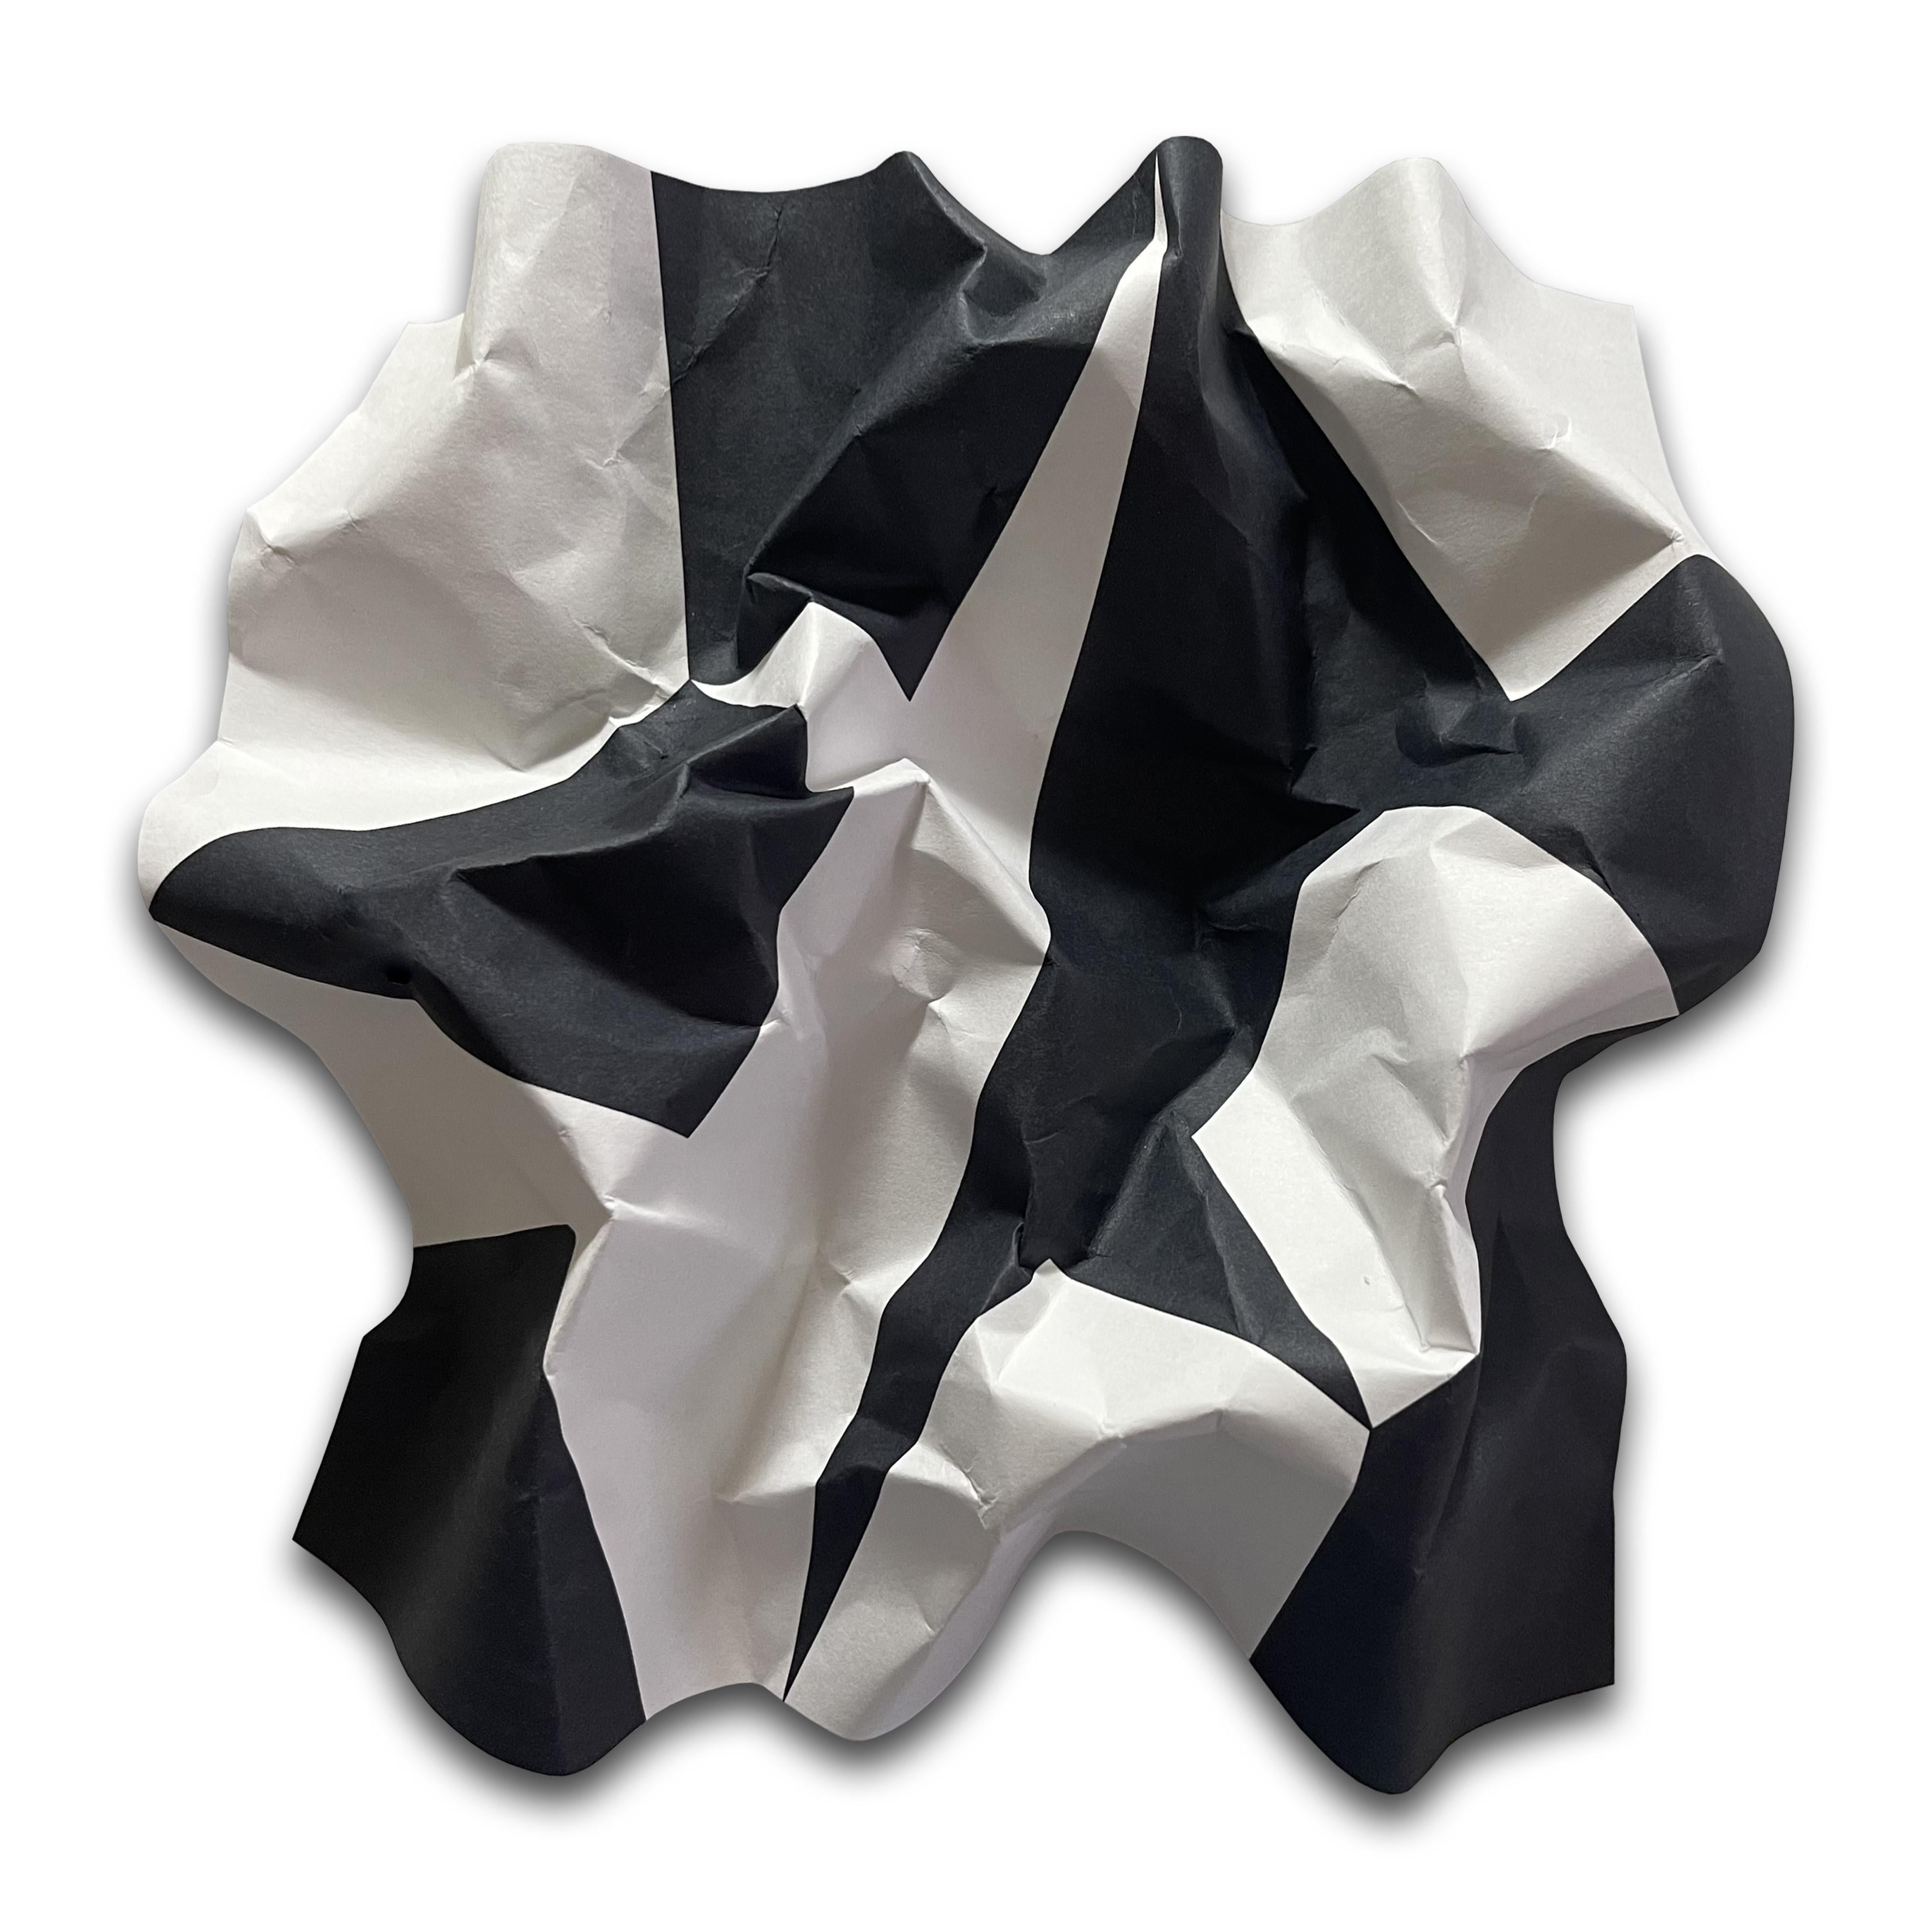 Jose Guedes Abstract Painting - "Lygia Clark (1)", Painting on cut aluminium, Trompe l'oeil, Constructivism